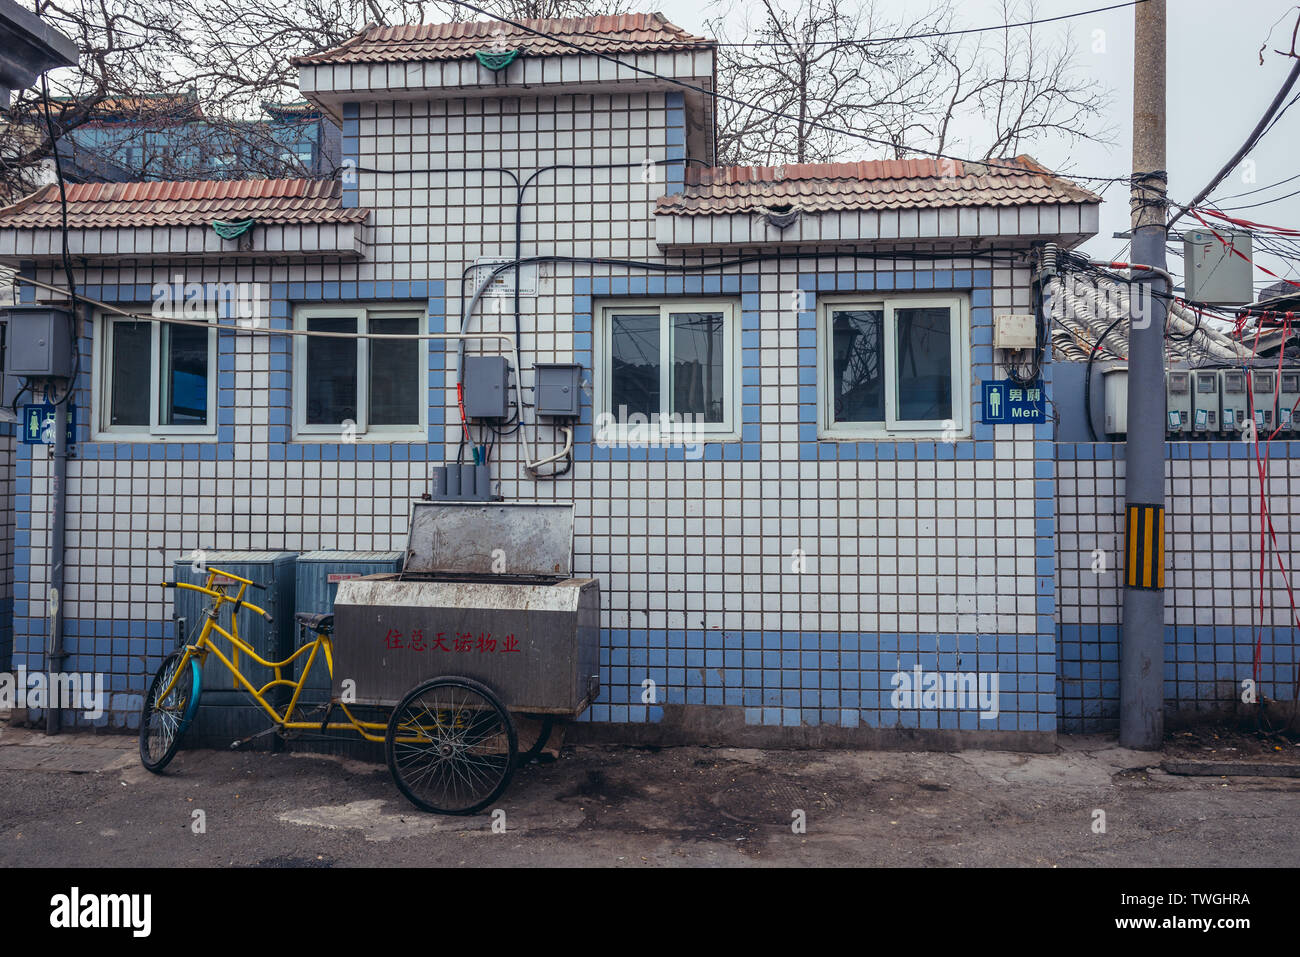 Toilet building in traditional hutong residential area in Dongcheng district of Beijing, China Stock Photo